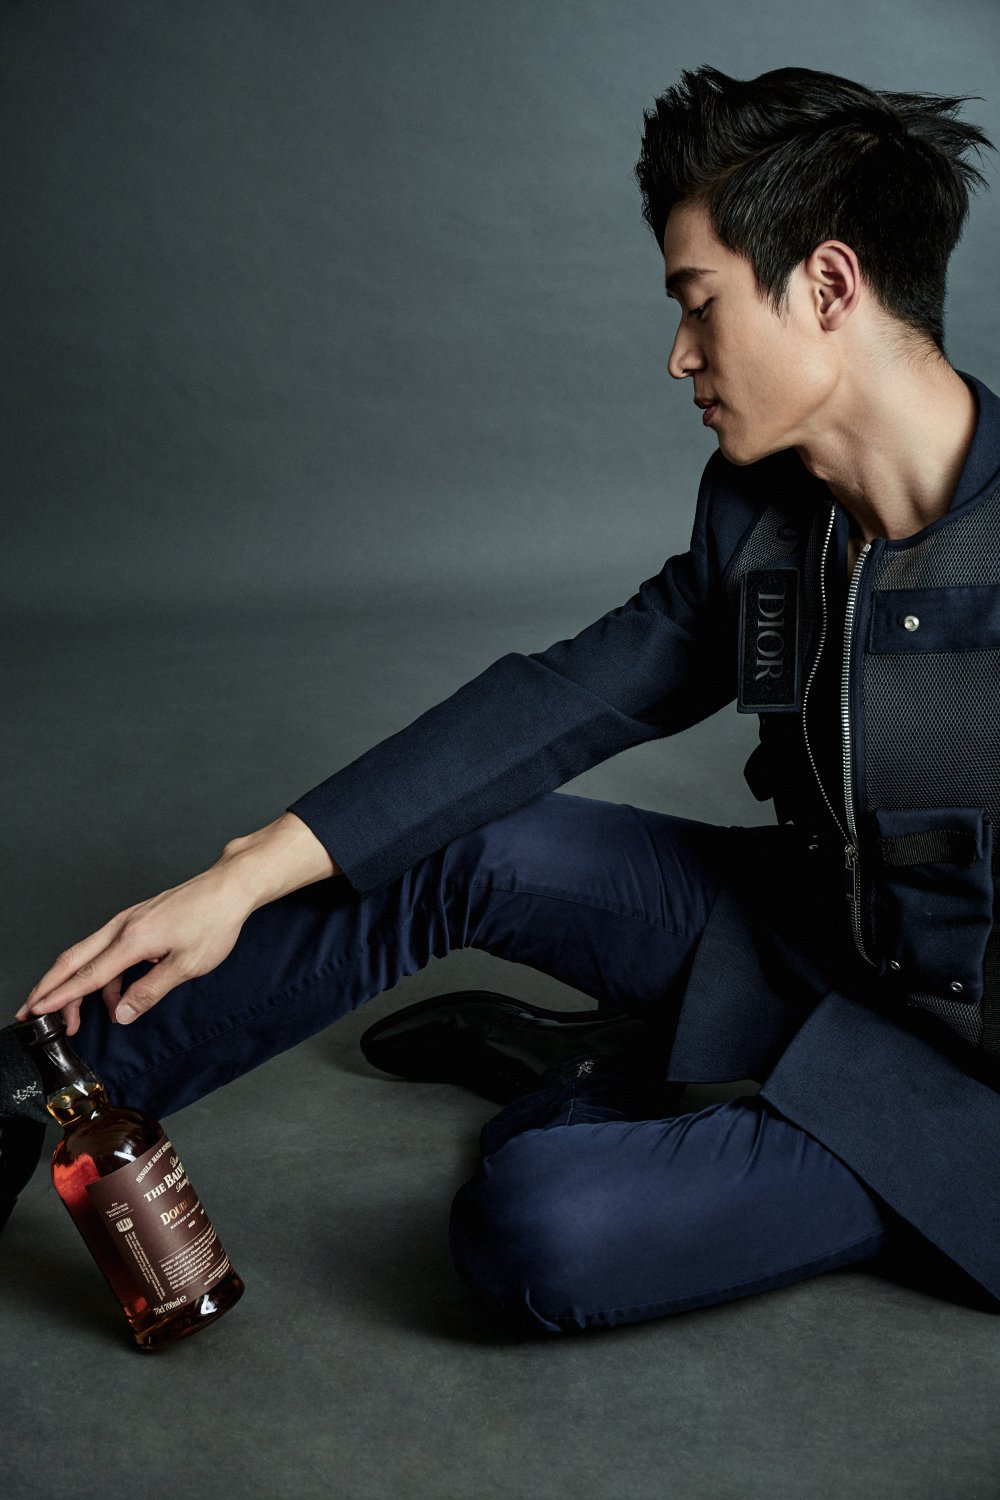 kingssleeve interview Daniel Tan founder of Aligned balvenie whisky - Daniel Tan: The Story Behind His Fame